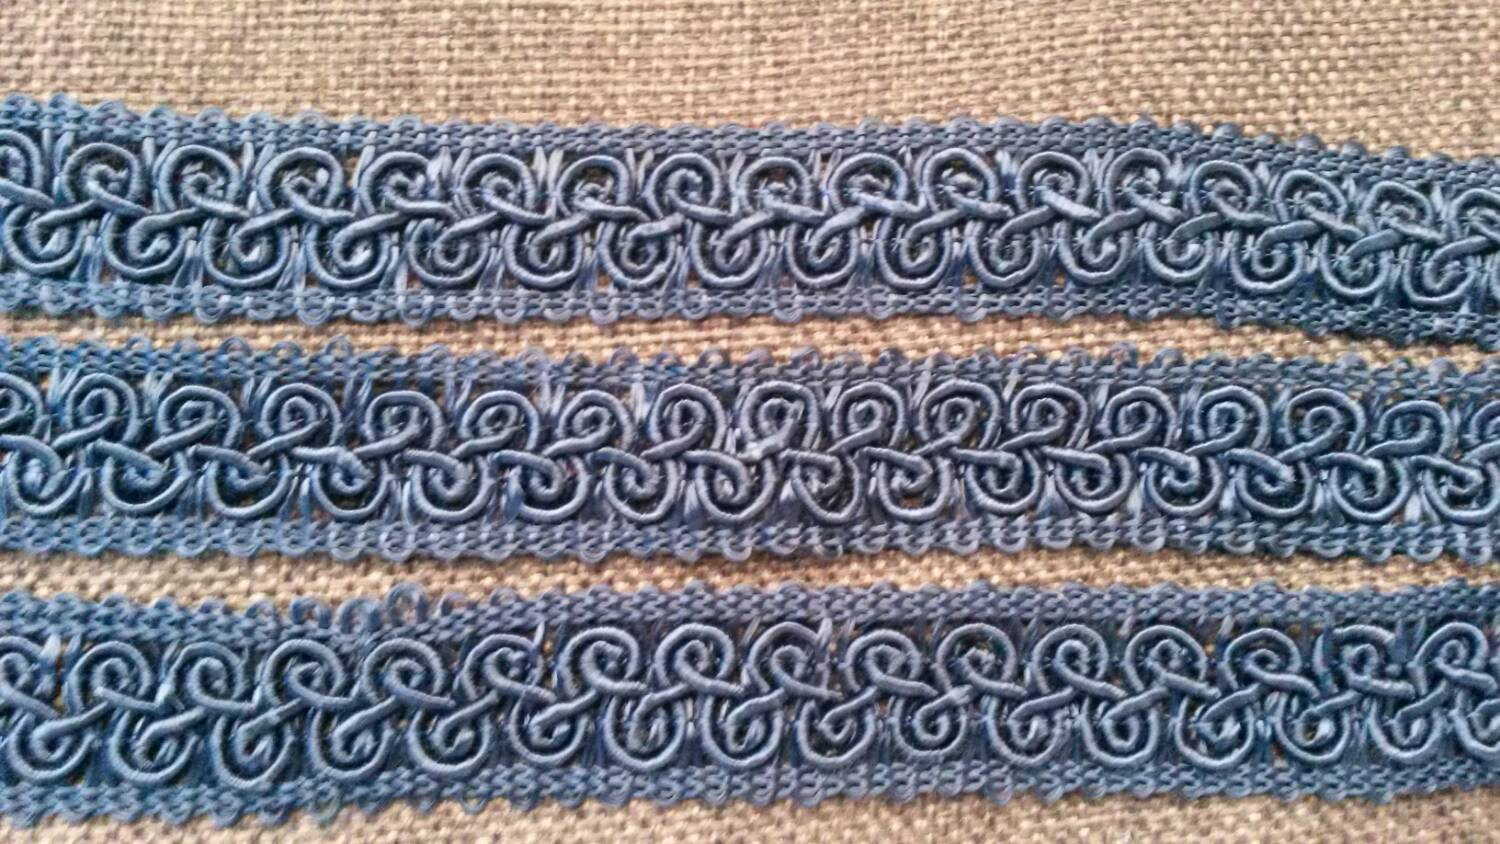 2 Yards BLUE Braided and Cotton Lace Trim by Yard 1 inch